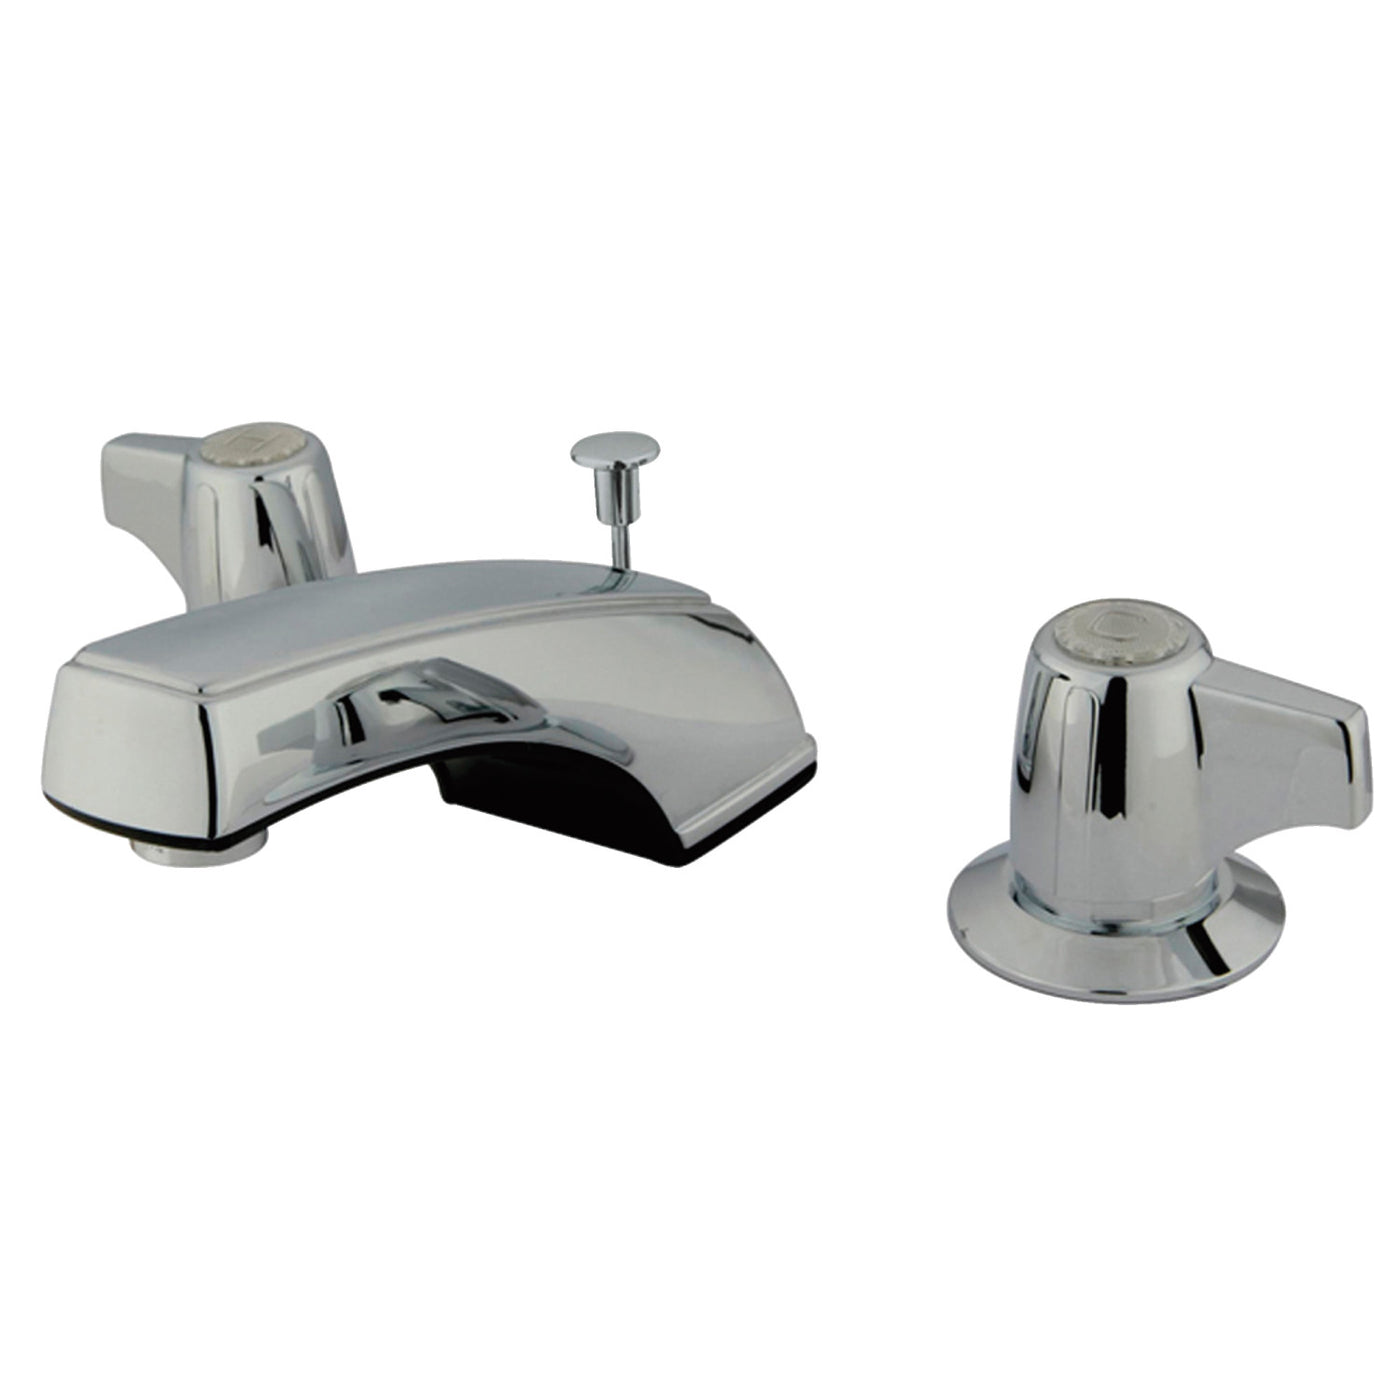 Elements of Design EB920 Widespread Bathroom Faucet with Plastic Pop-Up, Polished Chrome